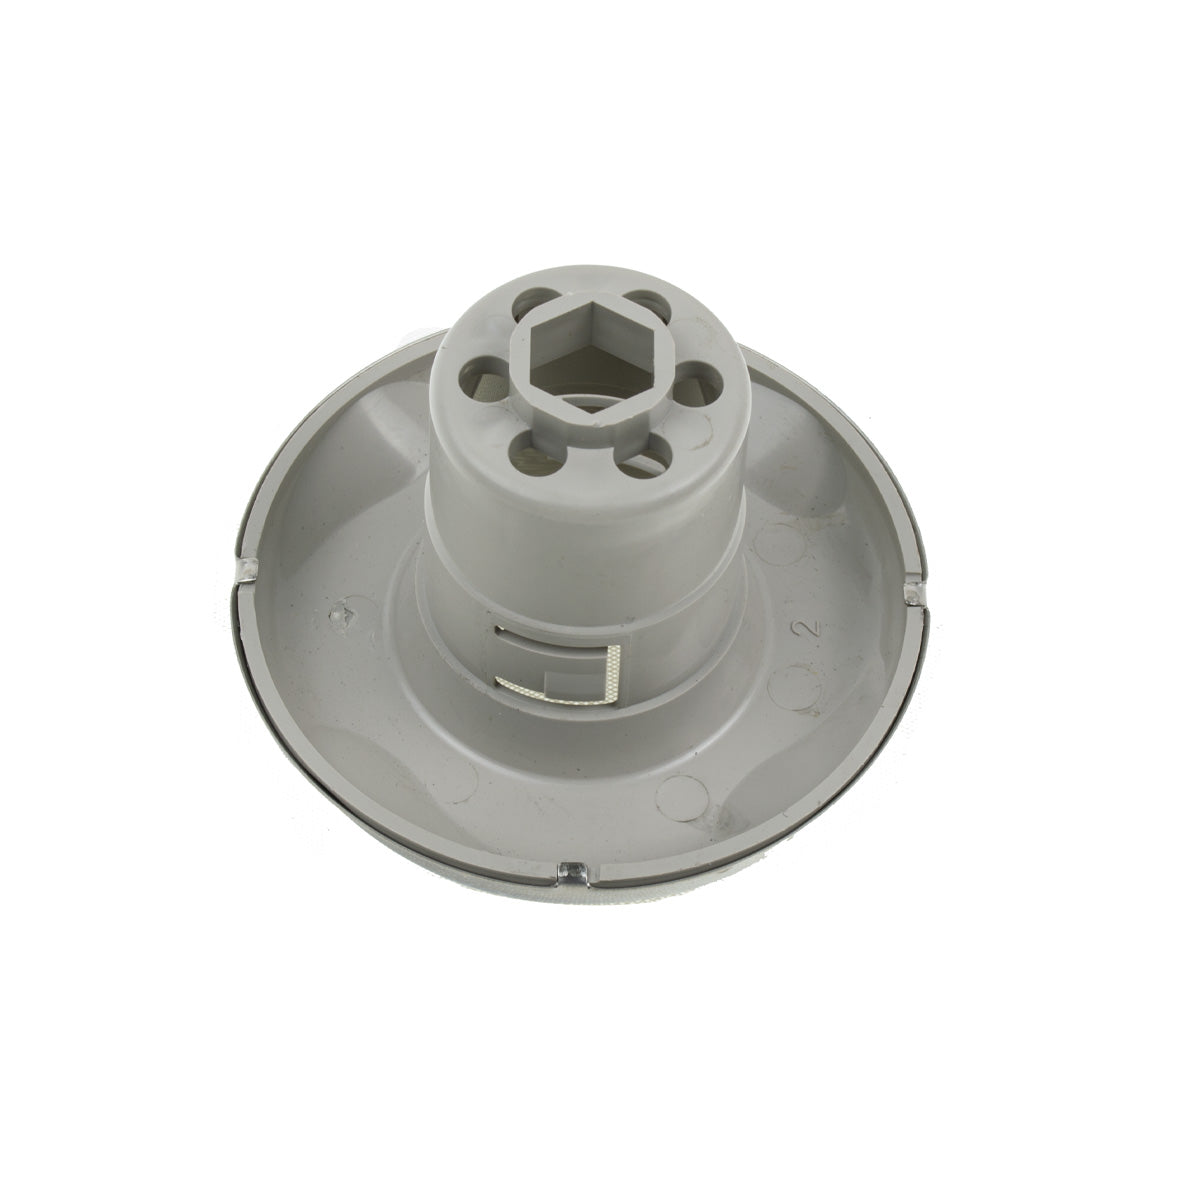 HotSpring Spa Mid Jet Face, Stainless Steel Escutcheon, Warm Gray #73811